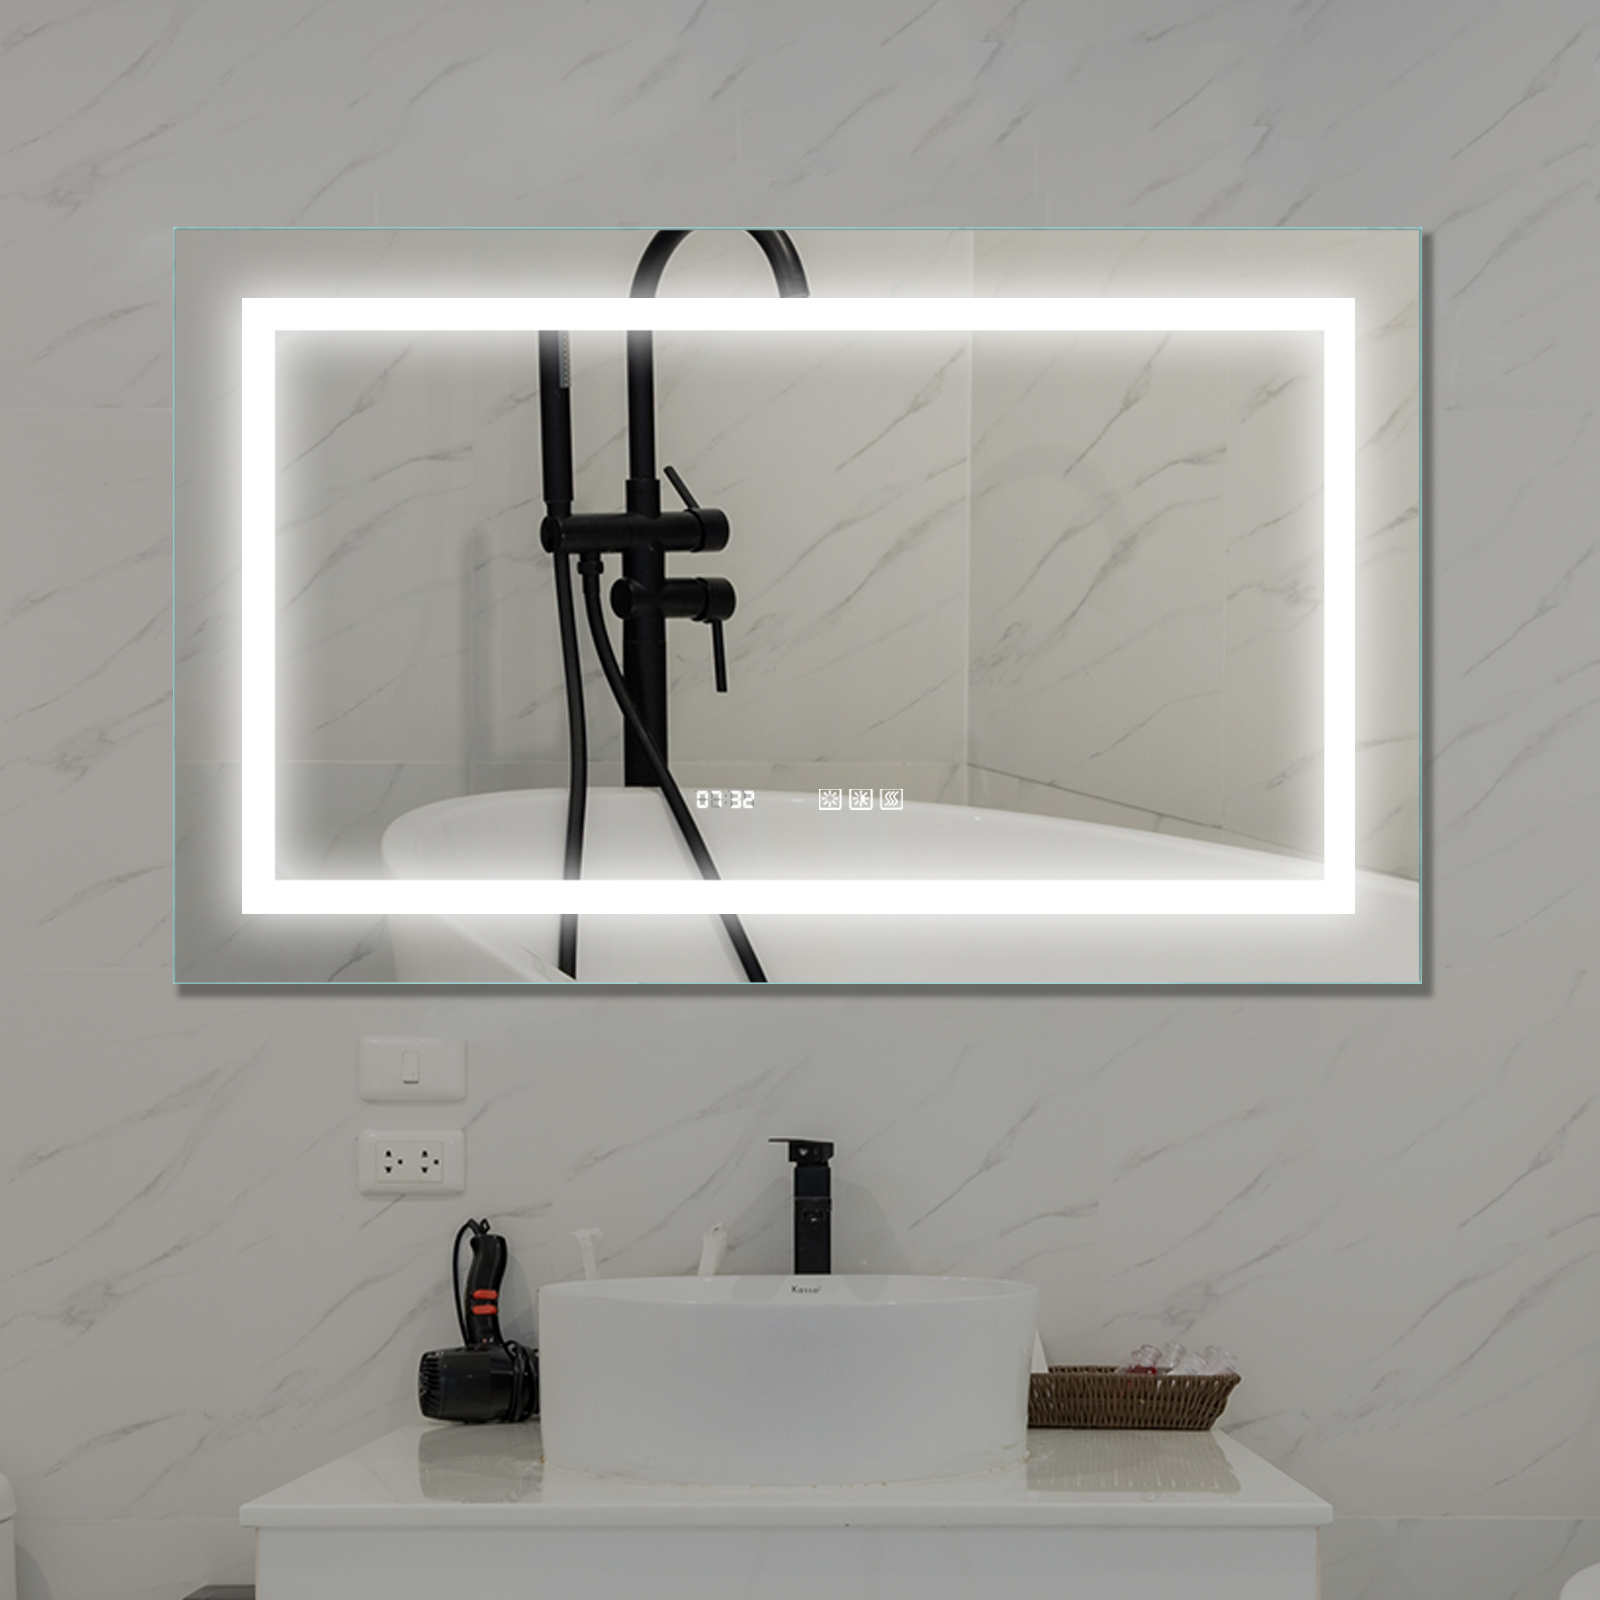 LED Bathroom Vanity Mirror, 40 x 24 inch, Anti Fog, Night Light, Time,Temperature,Dimmable,Color Temper 3000K-6400K,90+ CRI,Horizontal Wall Mounted Only-CASAINC